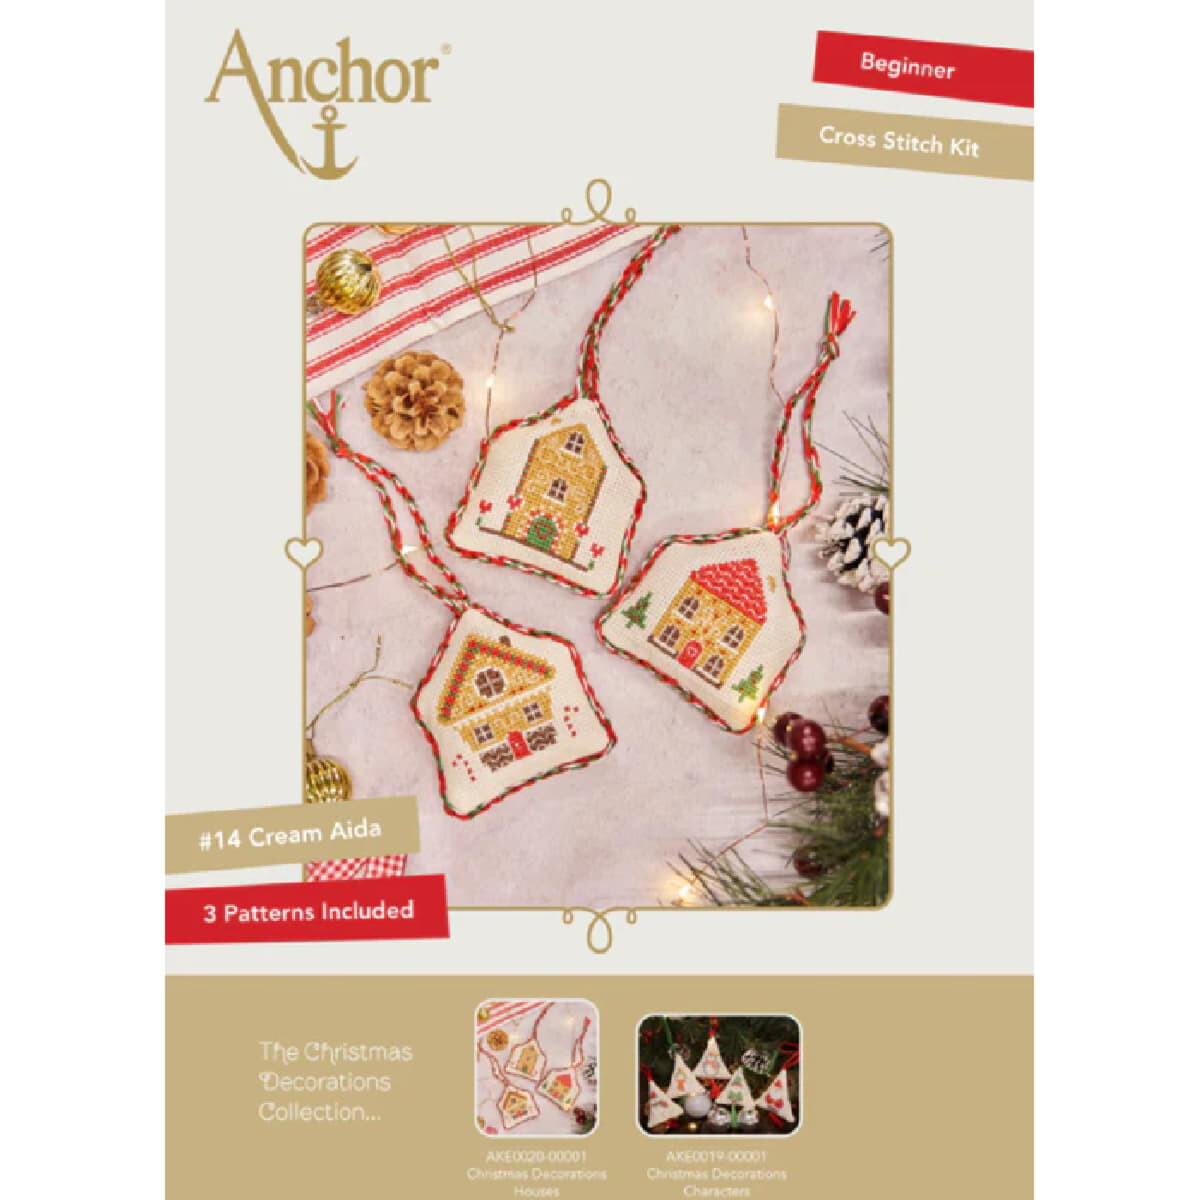 Anchor counted cross stitch kit "Hanger Christmas...